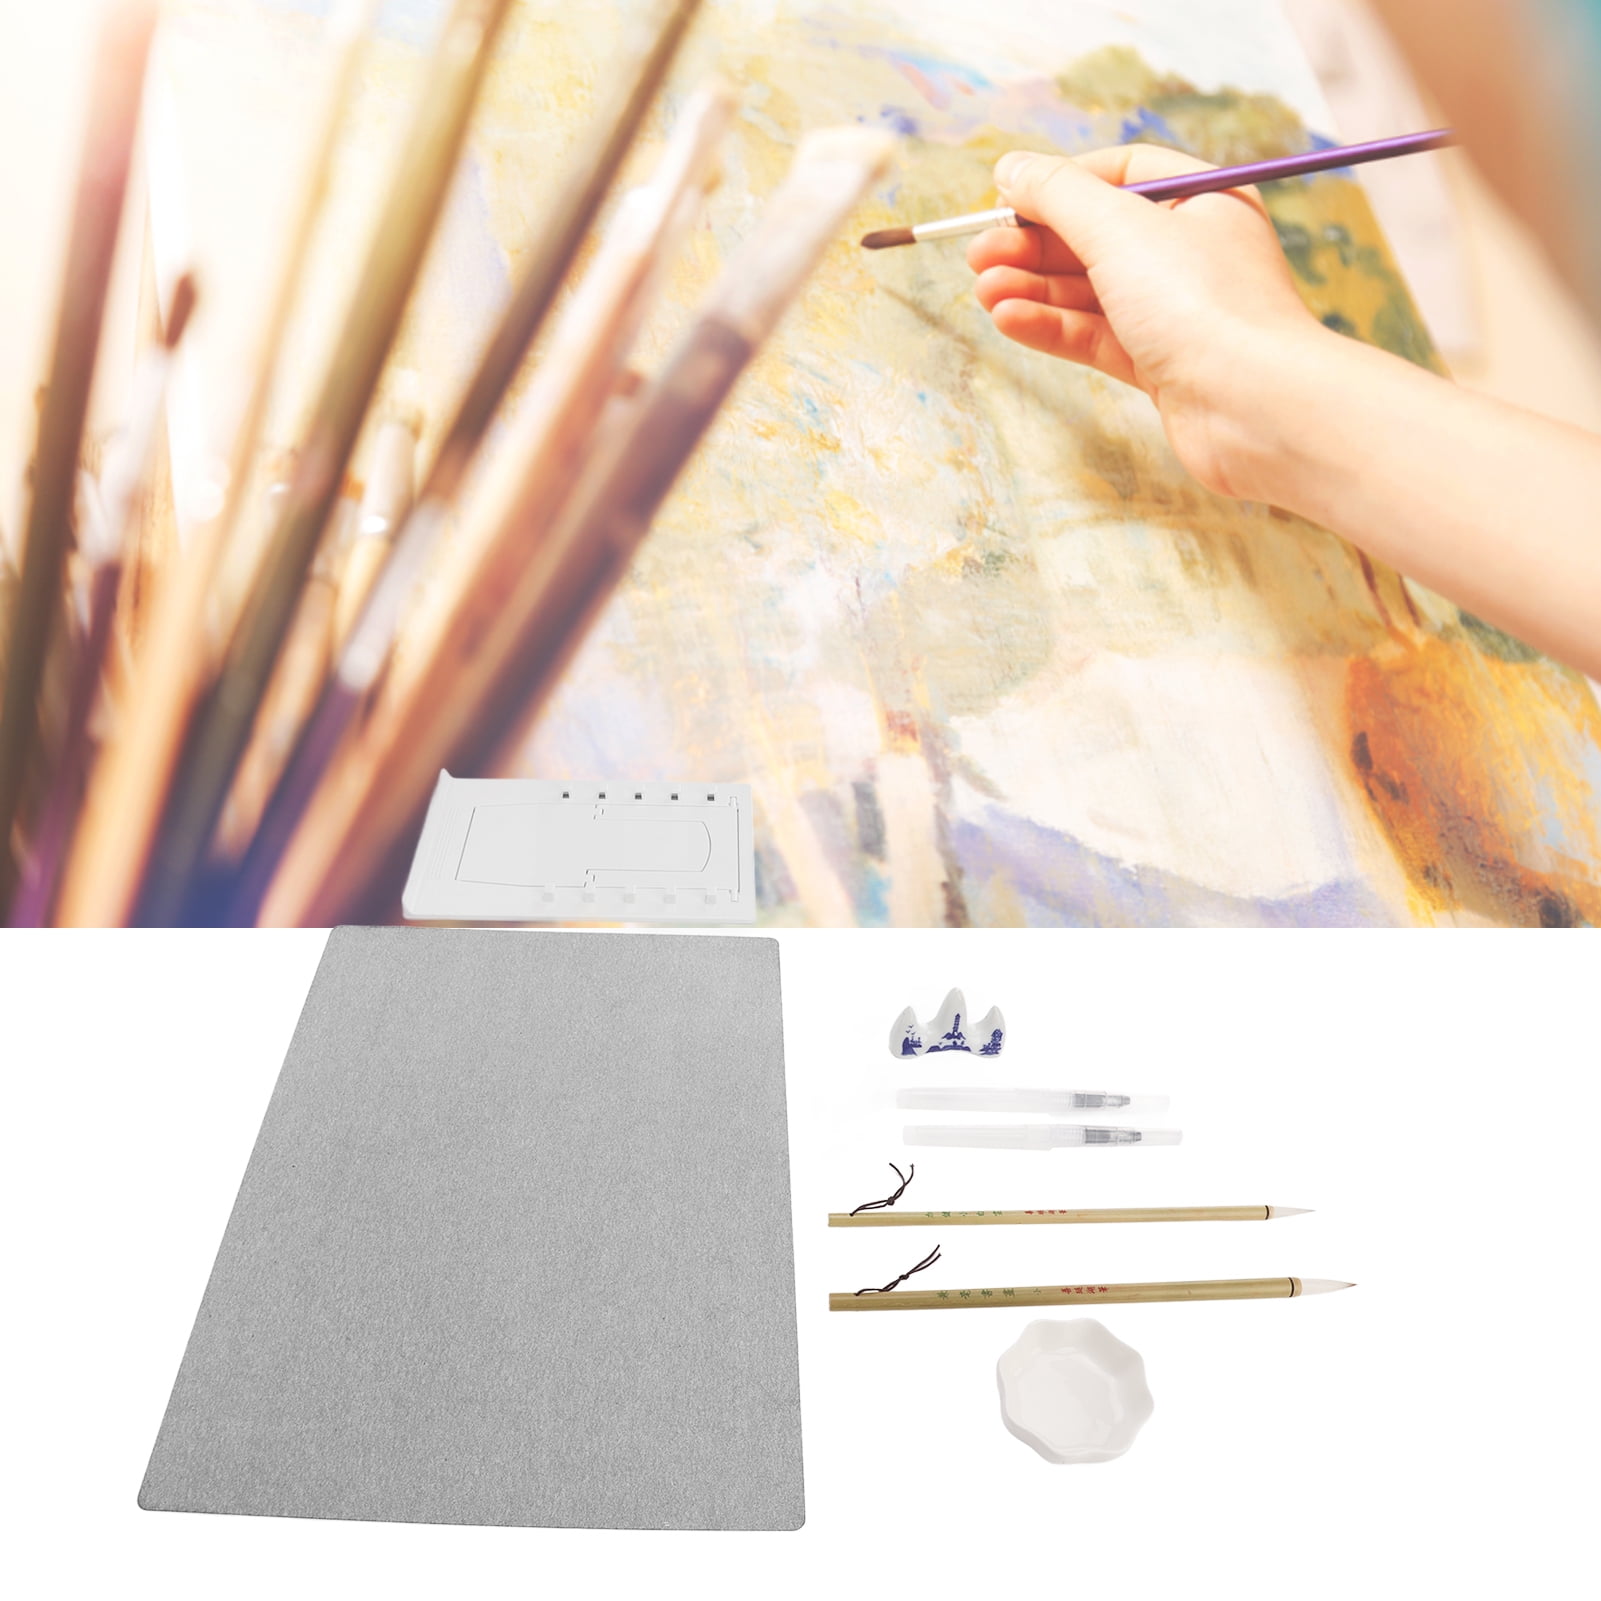 Zen Artist Board Mini, Paint with Water Relaxation Meditation Art, Relieve  Stress, Small Travel Size Magic Drawing Watercolor with Brush